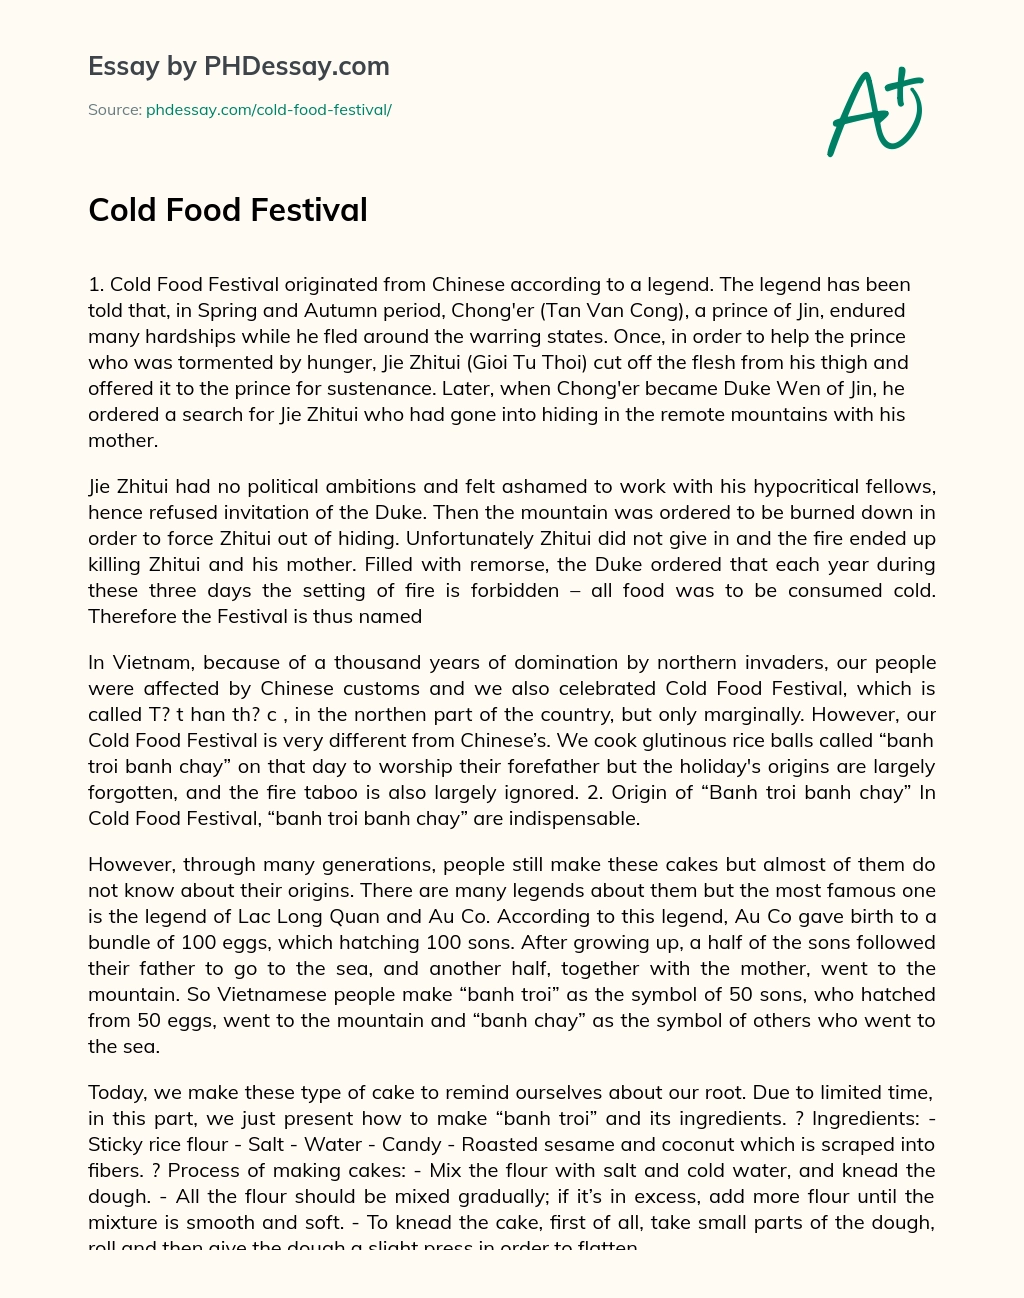 Cold Food Festival essay